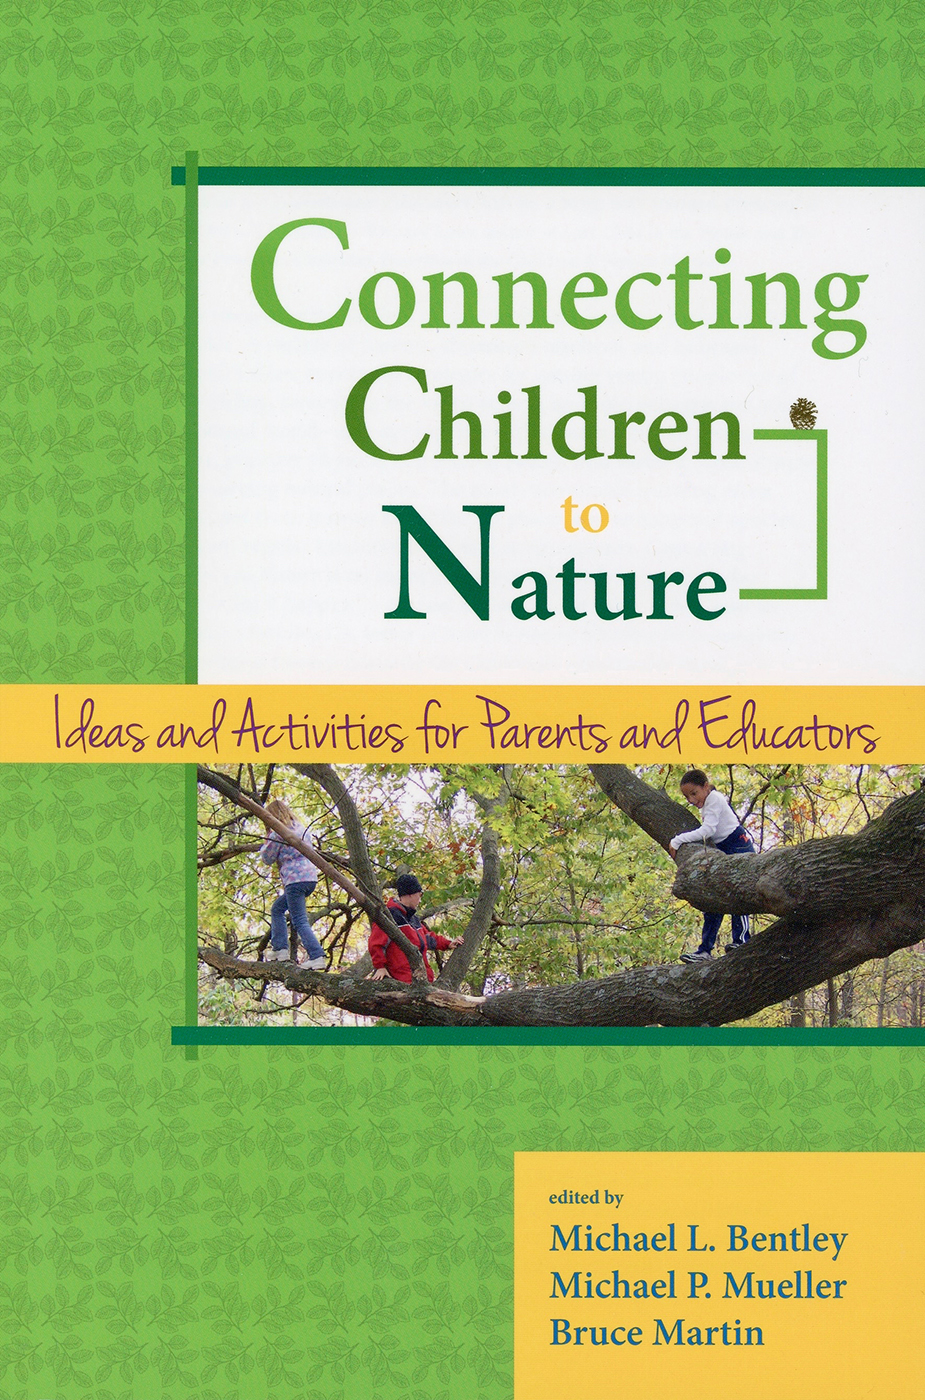 Connecting Children to Nature:  Ideas and Activities for Parents and Educators